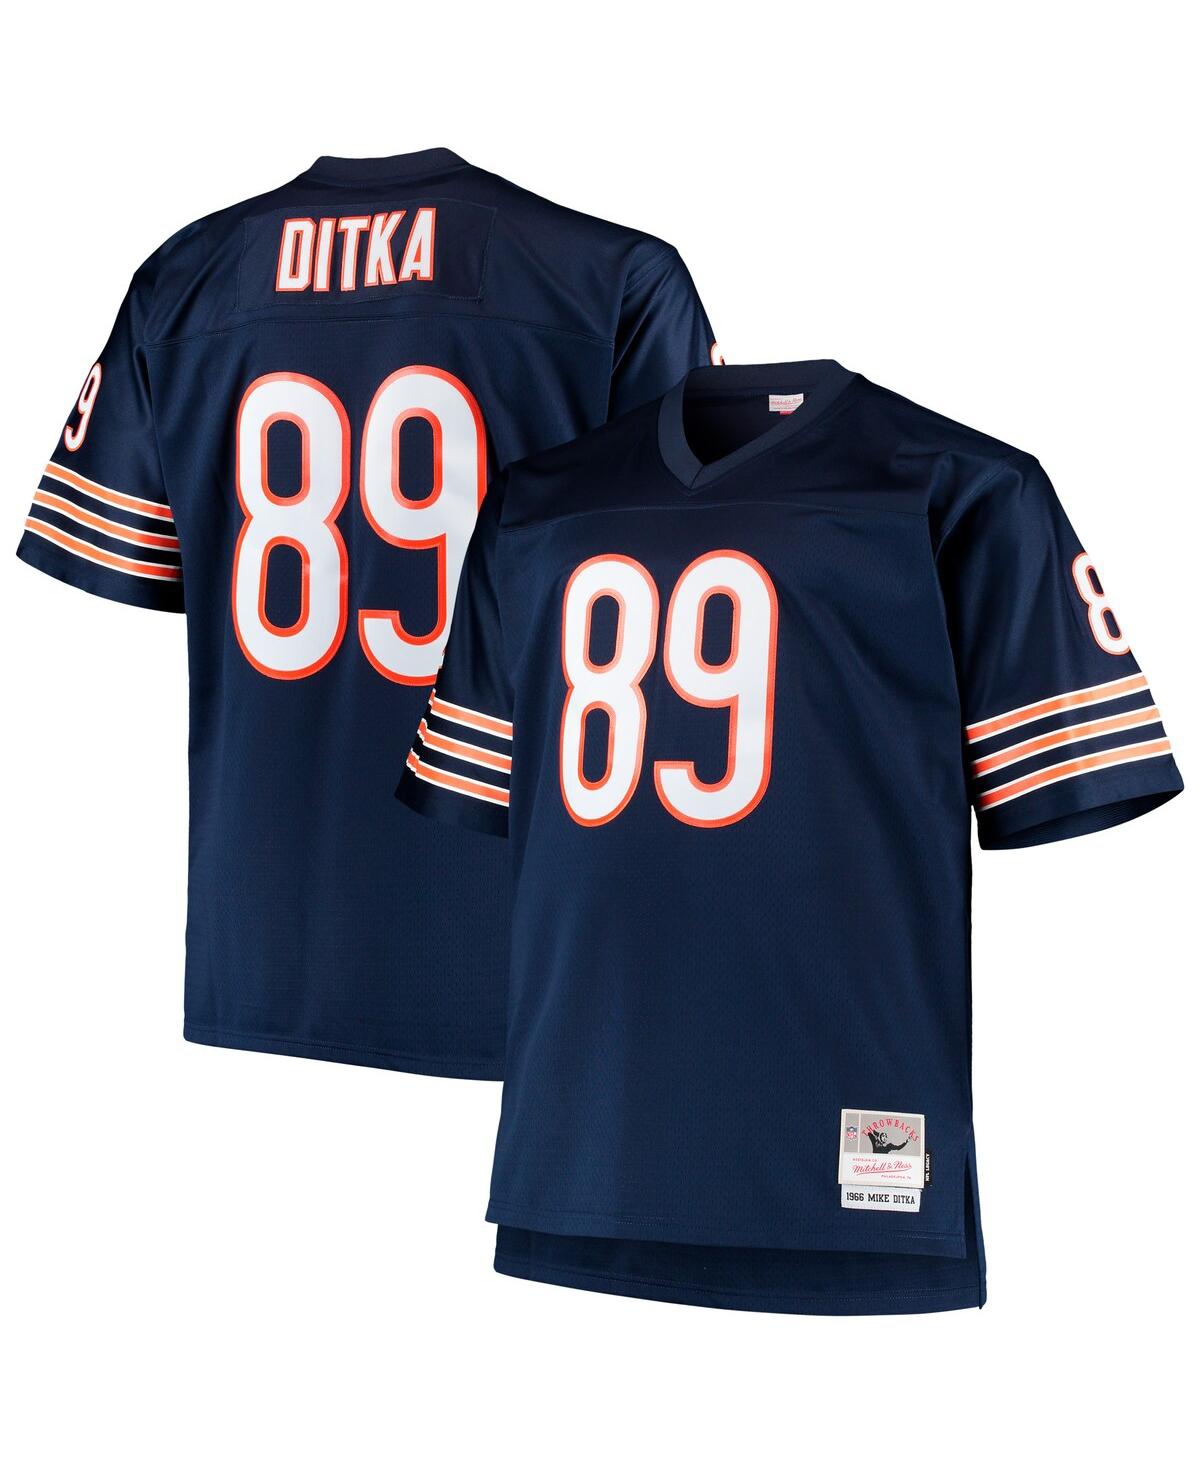 Men's Mitchell & Ness Mike Ditka Navy Chicago Bears Big and Tall 1966 Retired Player Replica Jersey - Navy